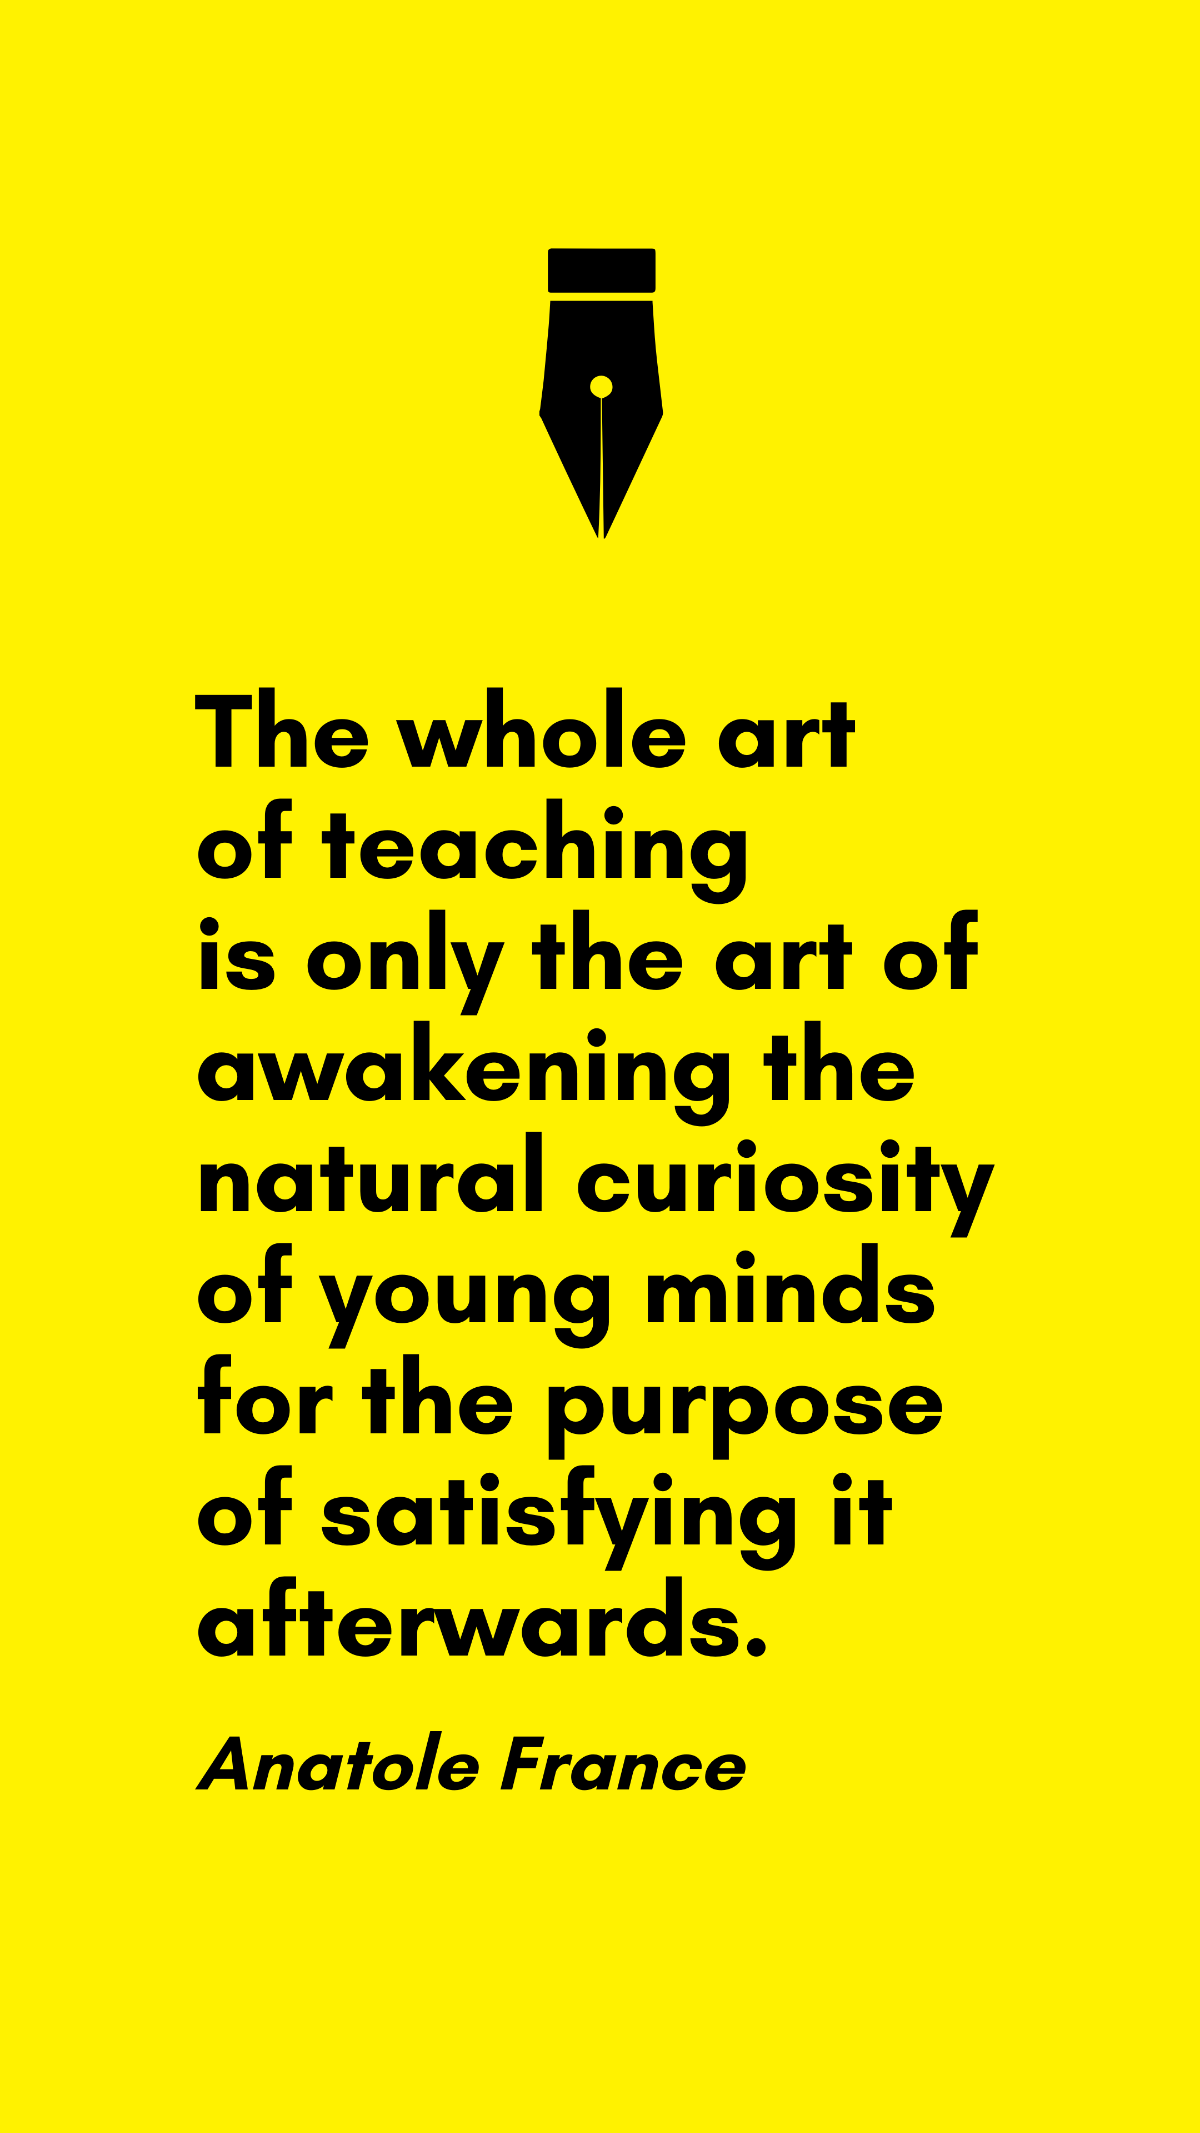 Free Anatole France - The whole art of teaching is only the art of awakening the natural curiosity of young minds for the purpose of satisfying it afterwards. Template